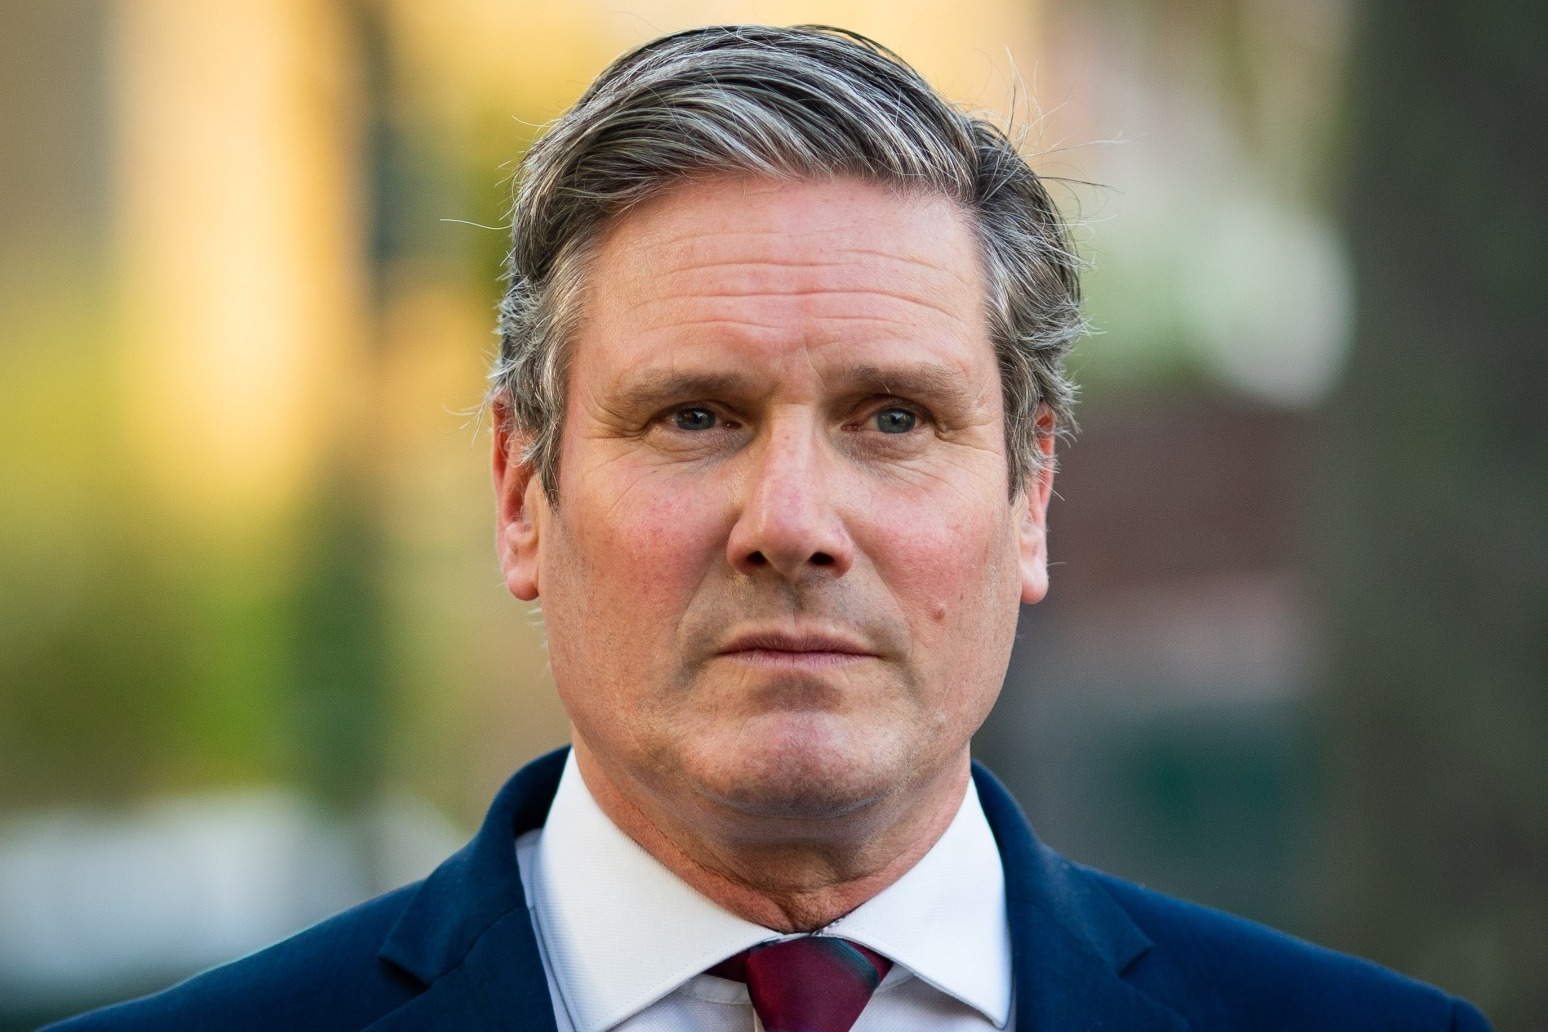 Keir Starmer backs Christmas restrictions, but says PM left it too late 